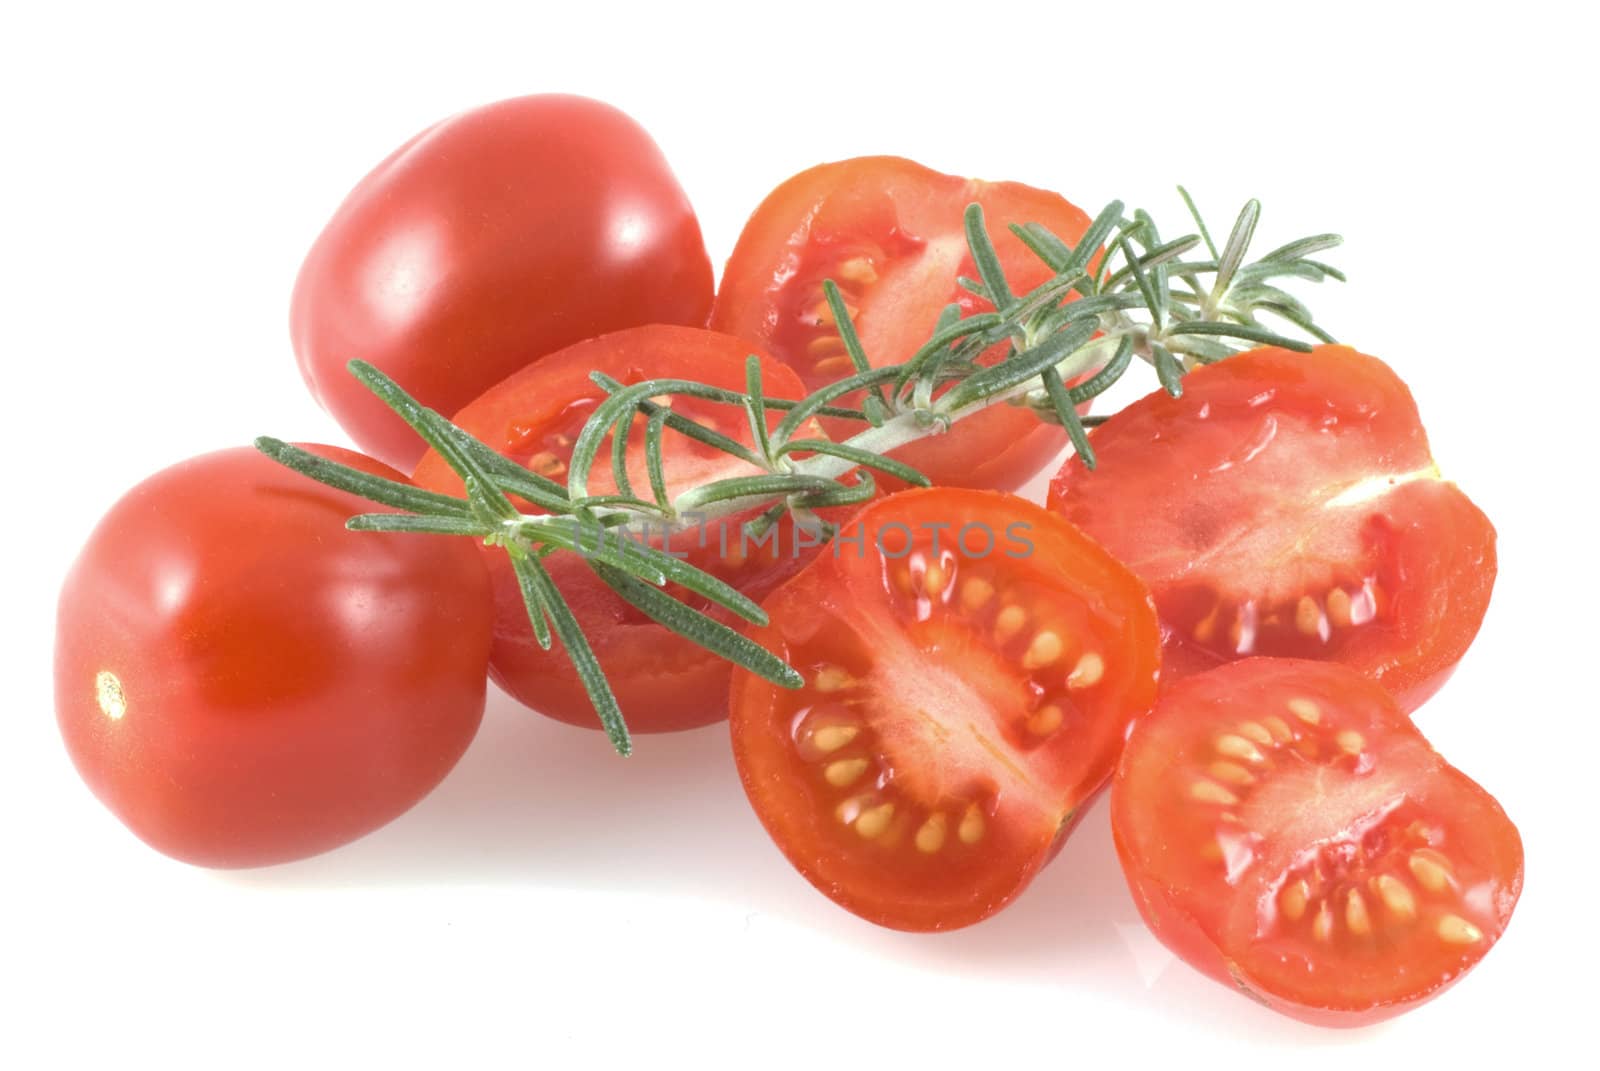 Cherry tomatoes and a thyme branch on a white background.